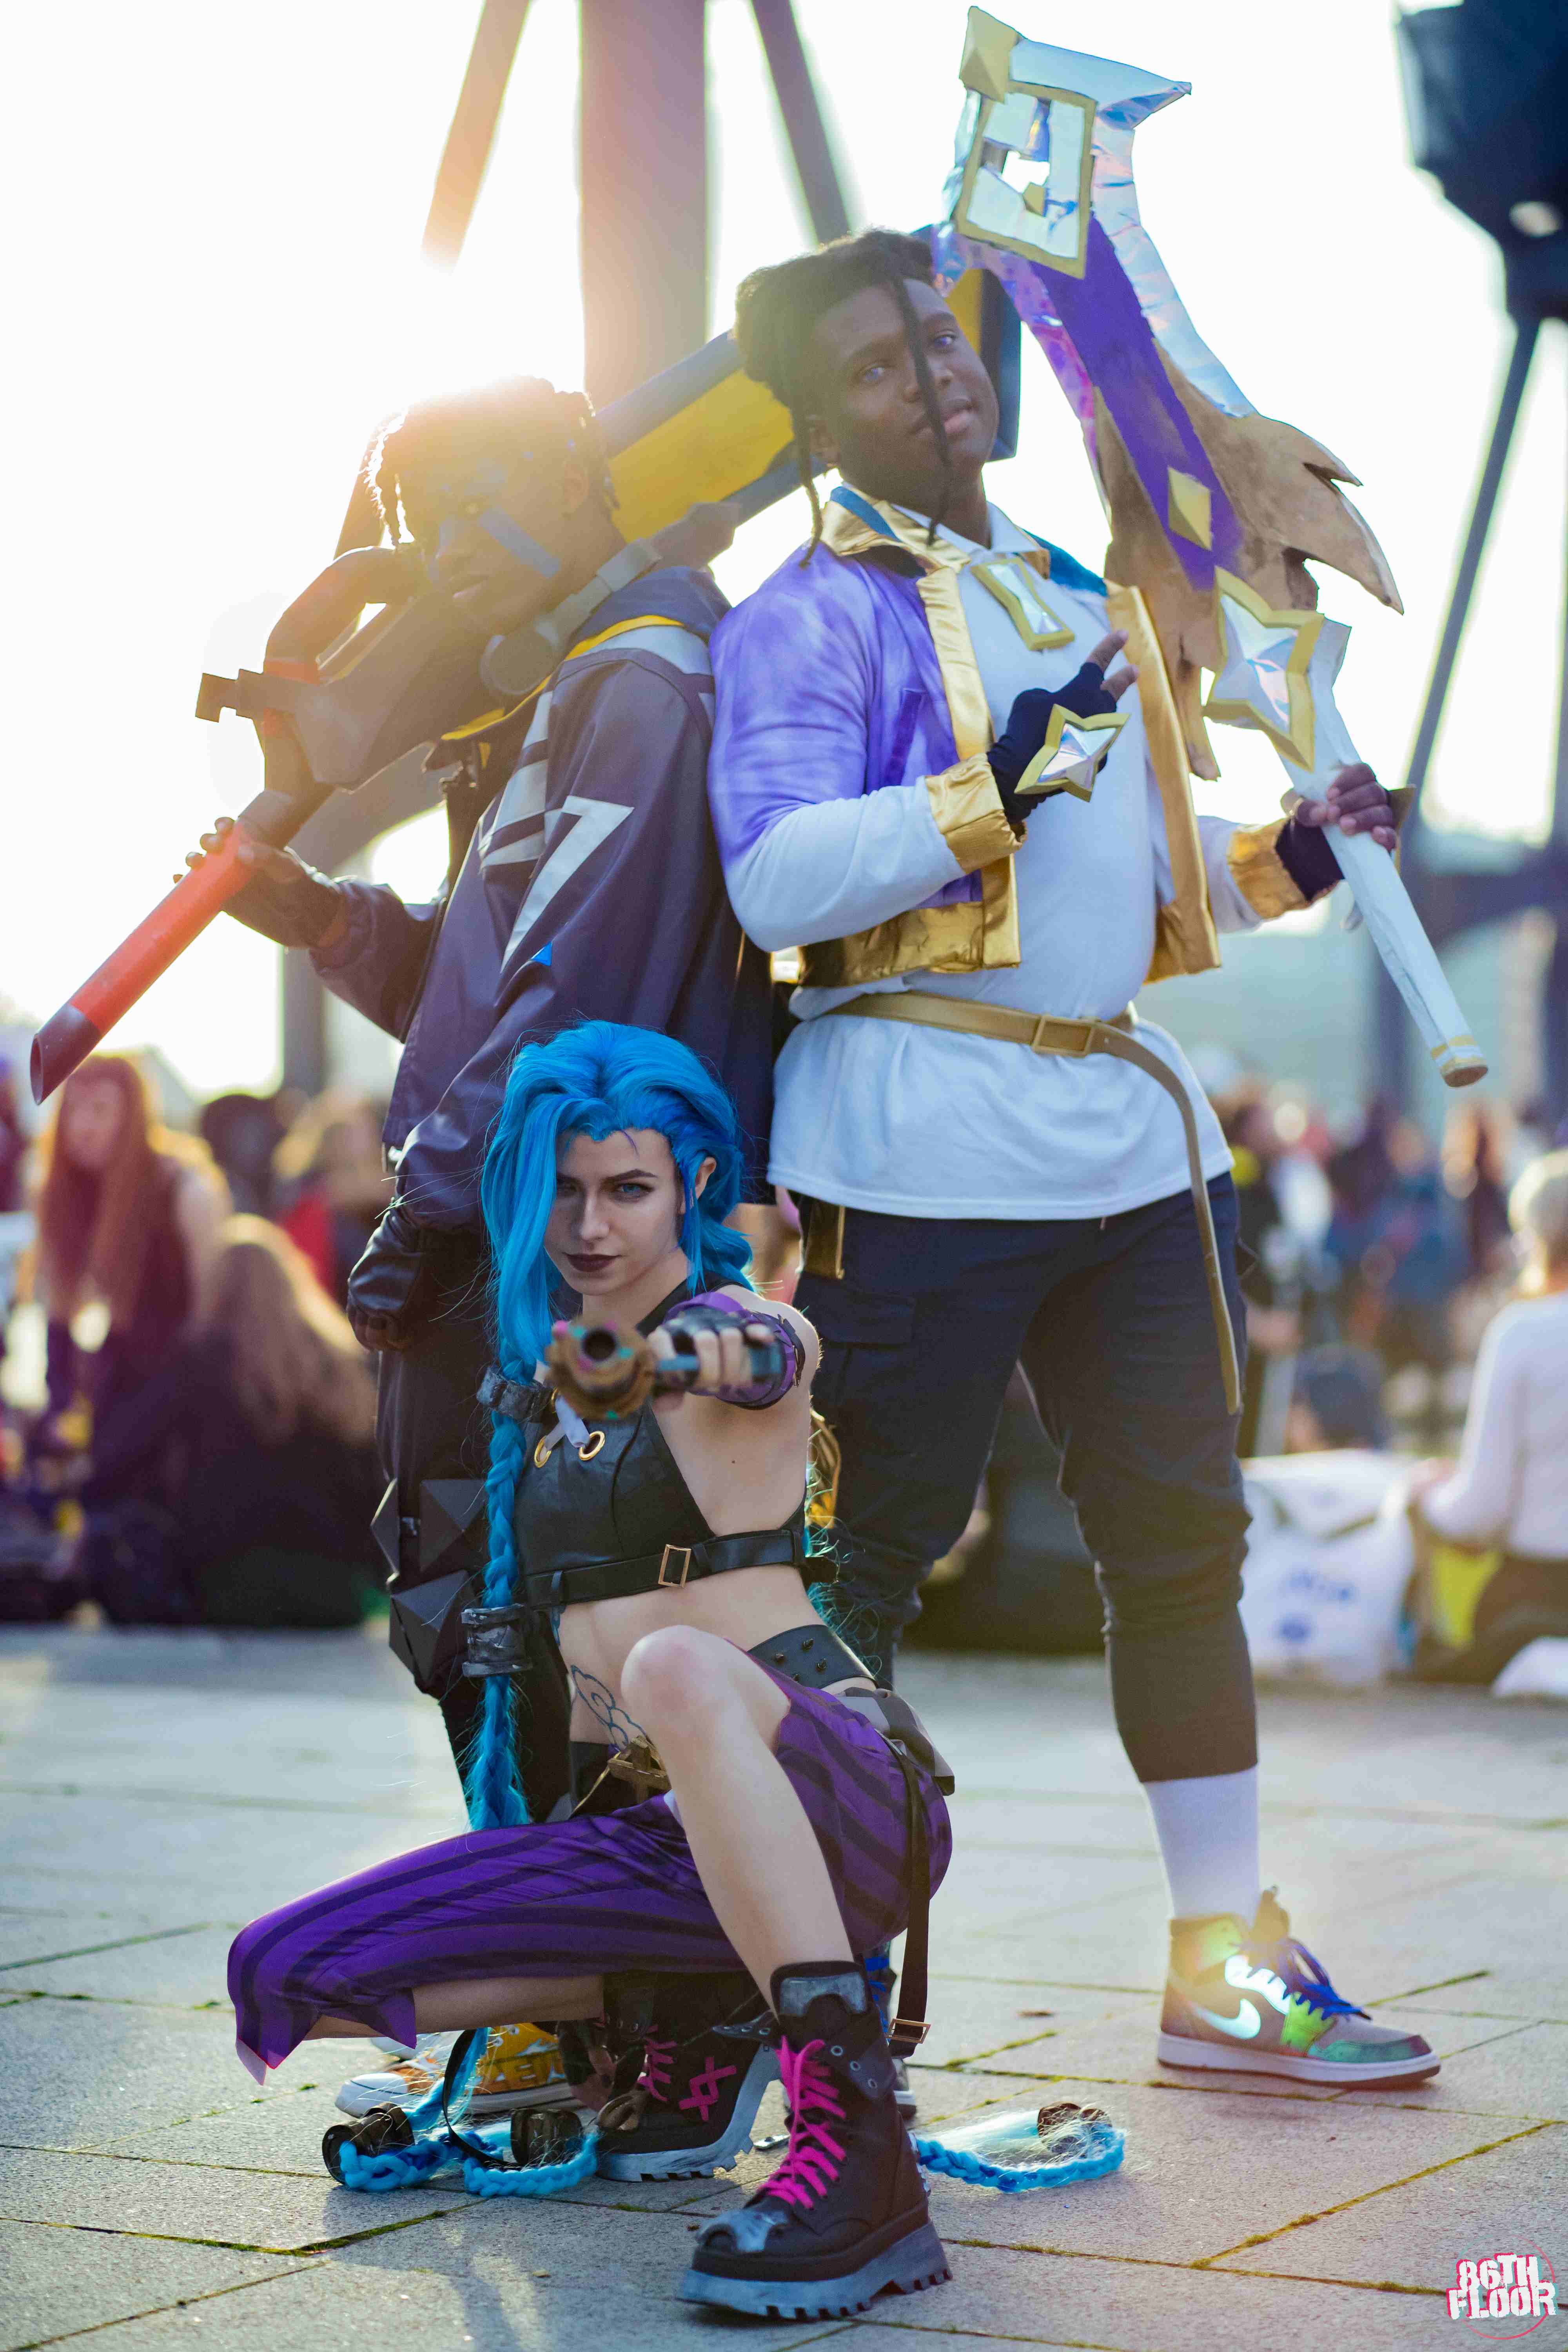 Arcane League of Legends cosplayers from MCM London Comic Con 2022 October